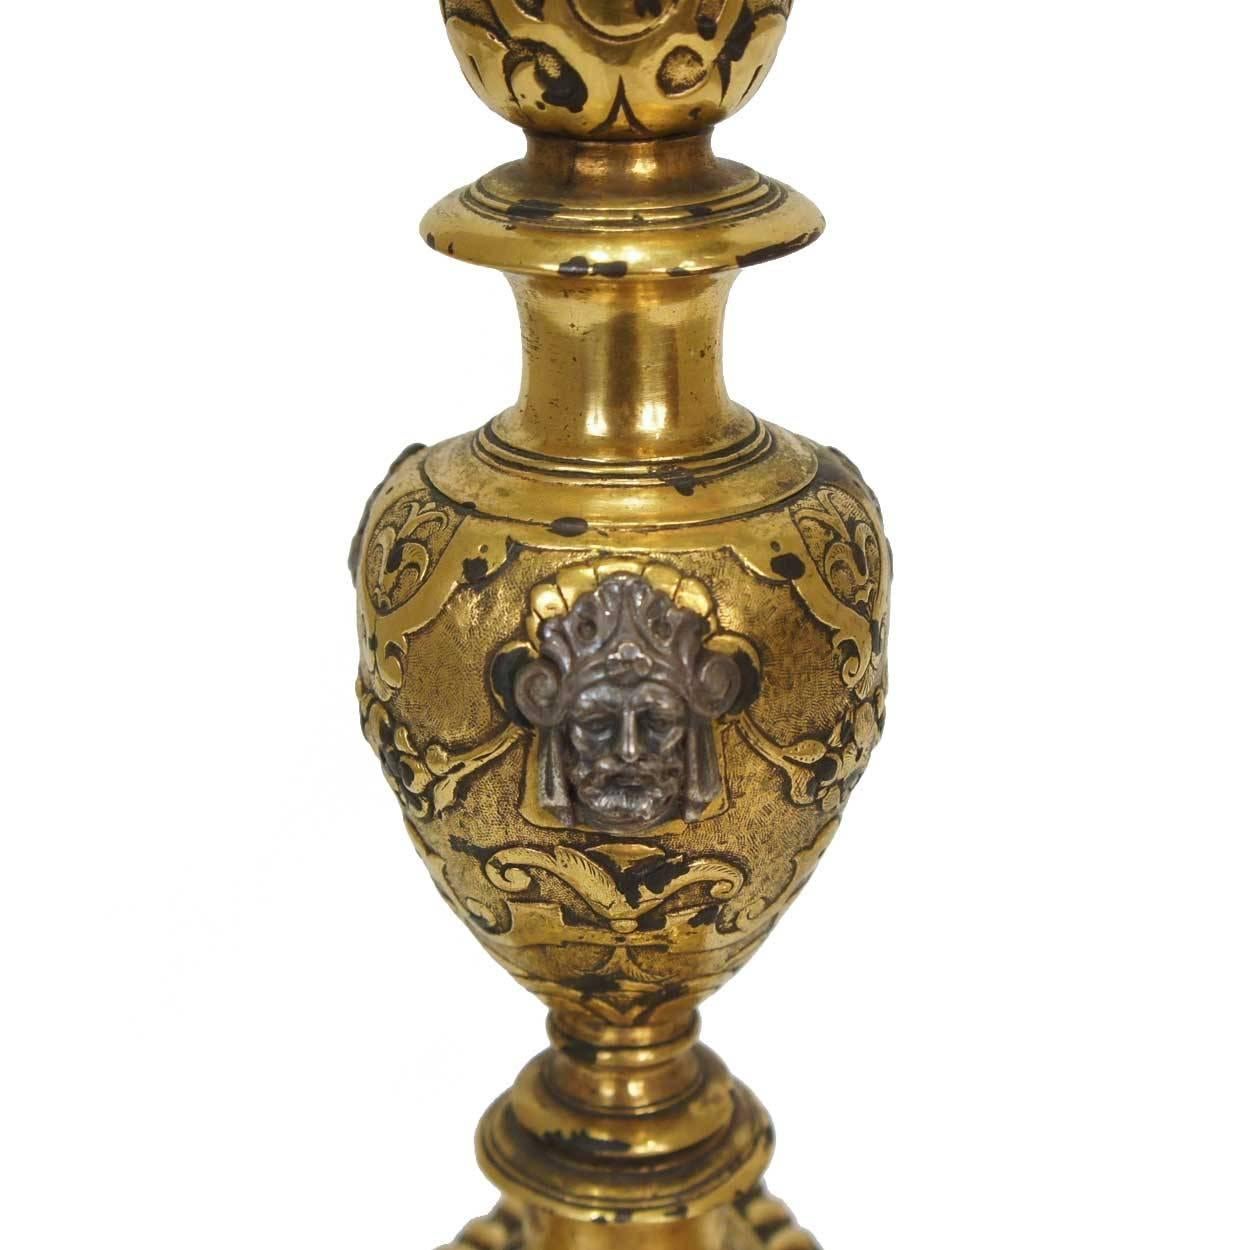 Italian Renaissance Style Silver and Gilt Bronze Table Lamp In Excellent Condition For Sale In Denver, CO